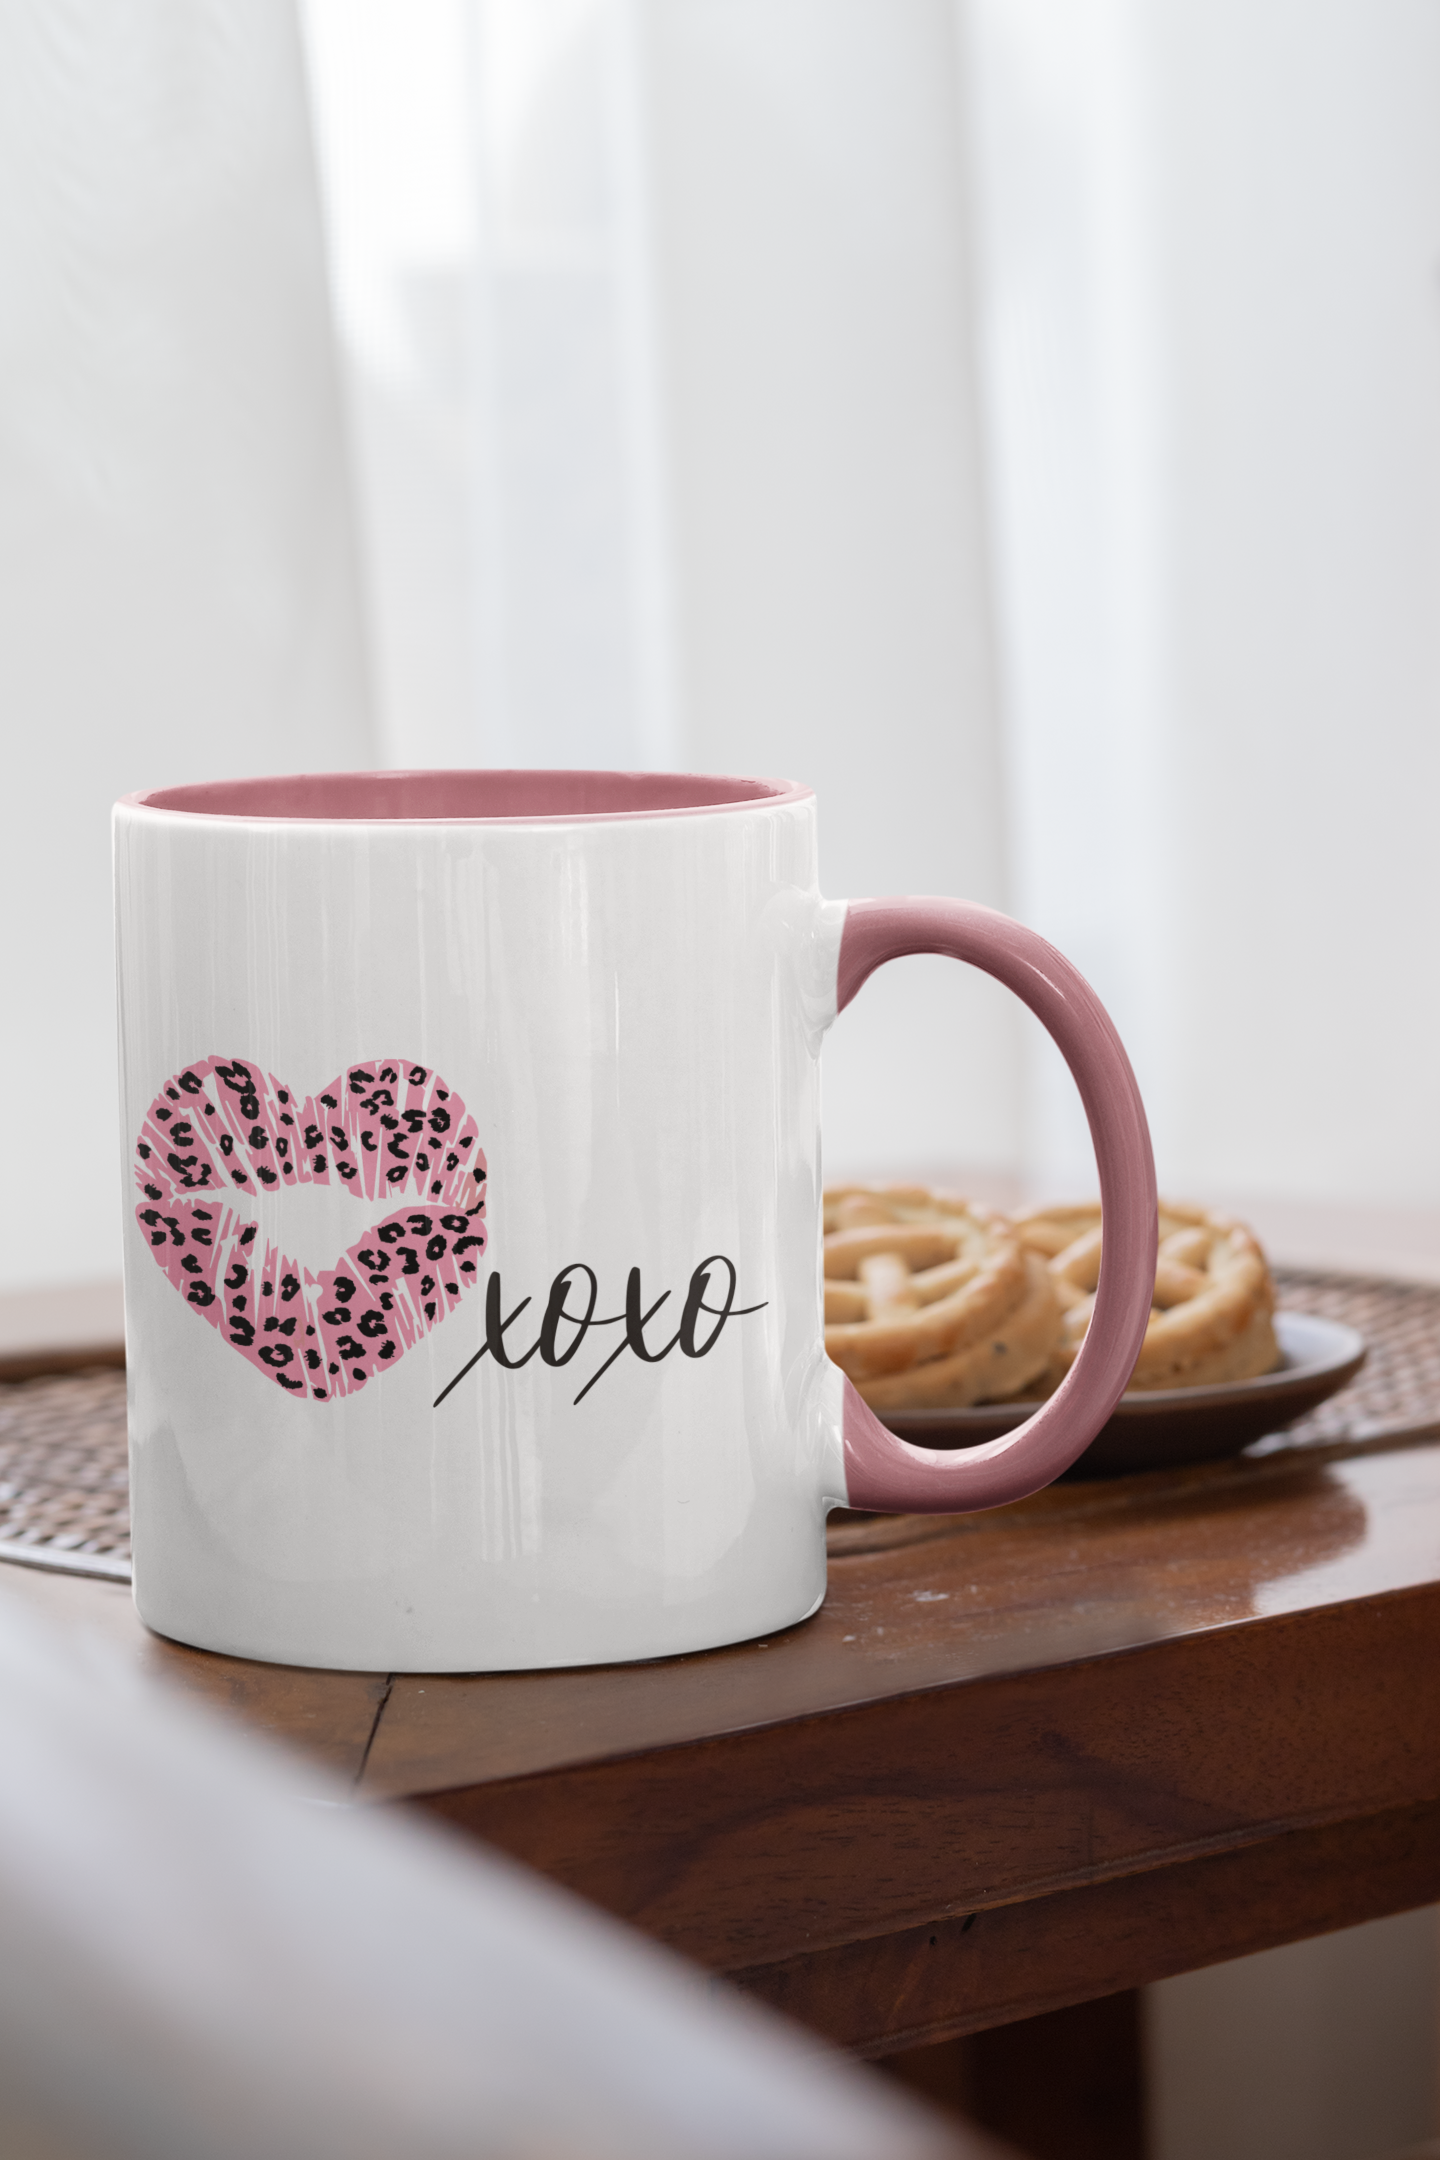 mockup-of-a-coffee-mug-with-a-different-color-handle-featuring-some-cookies-33816 (1)